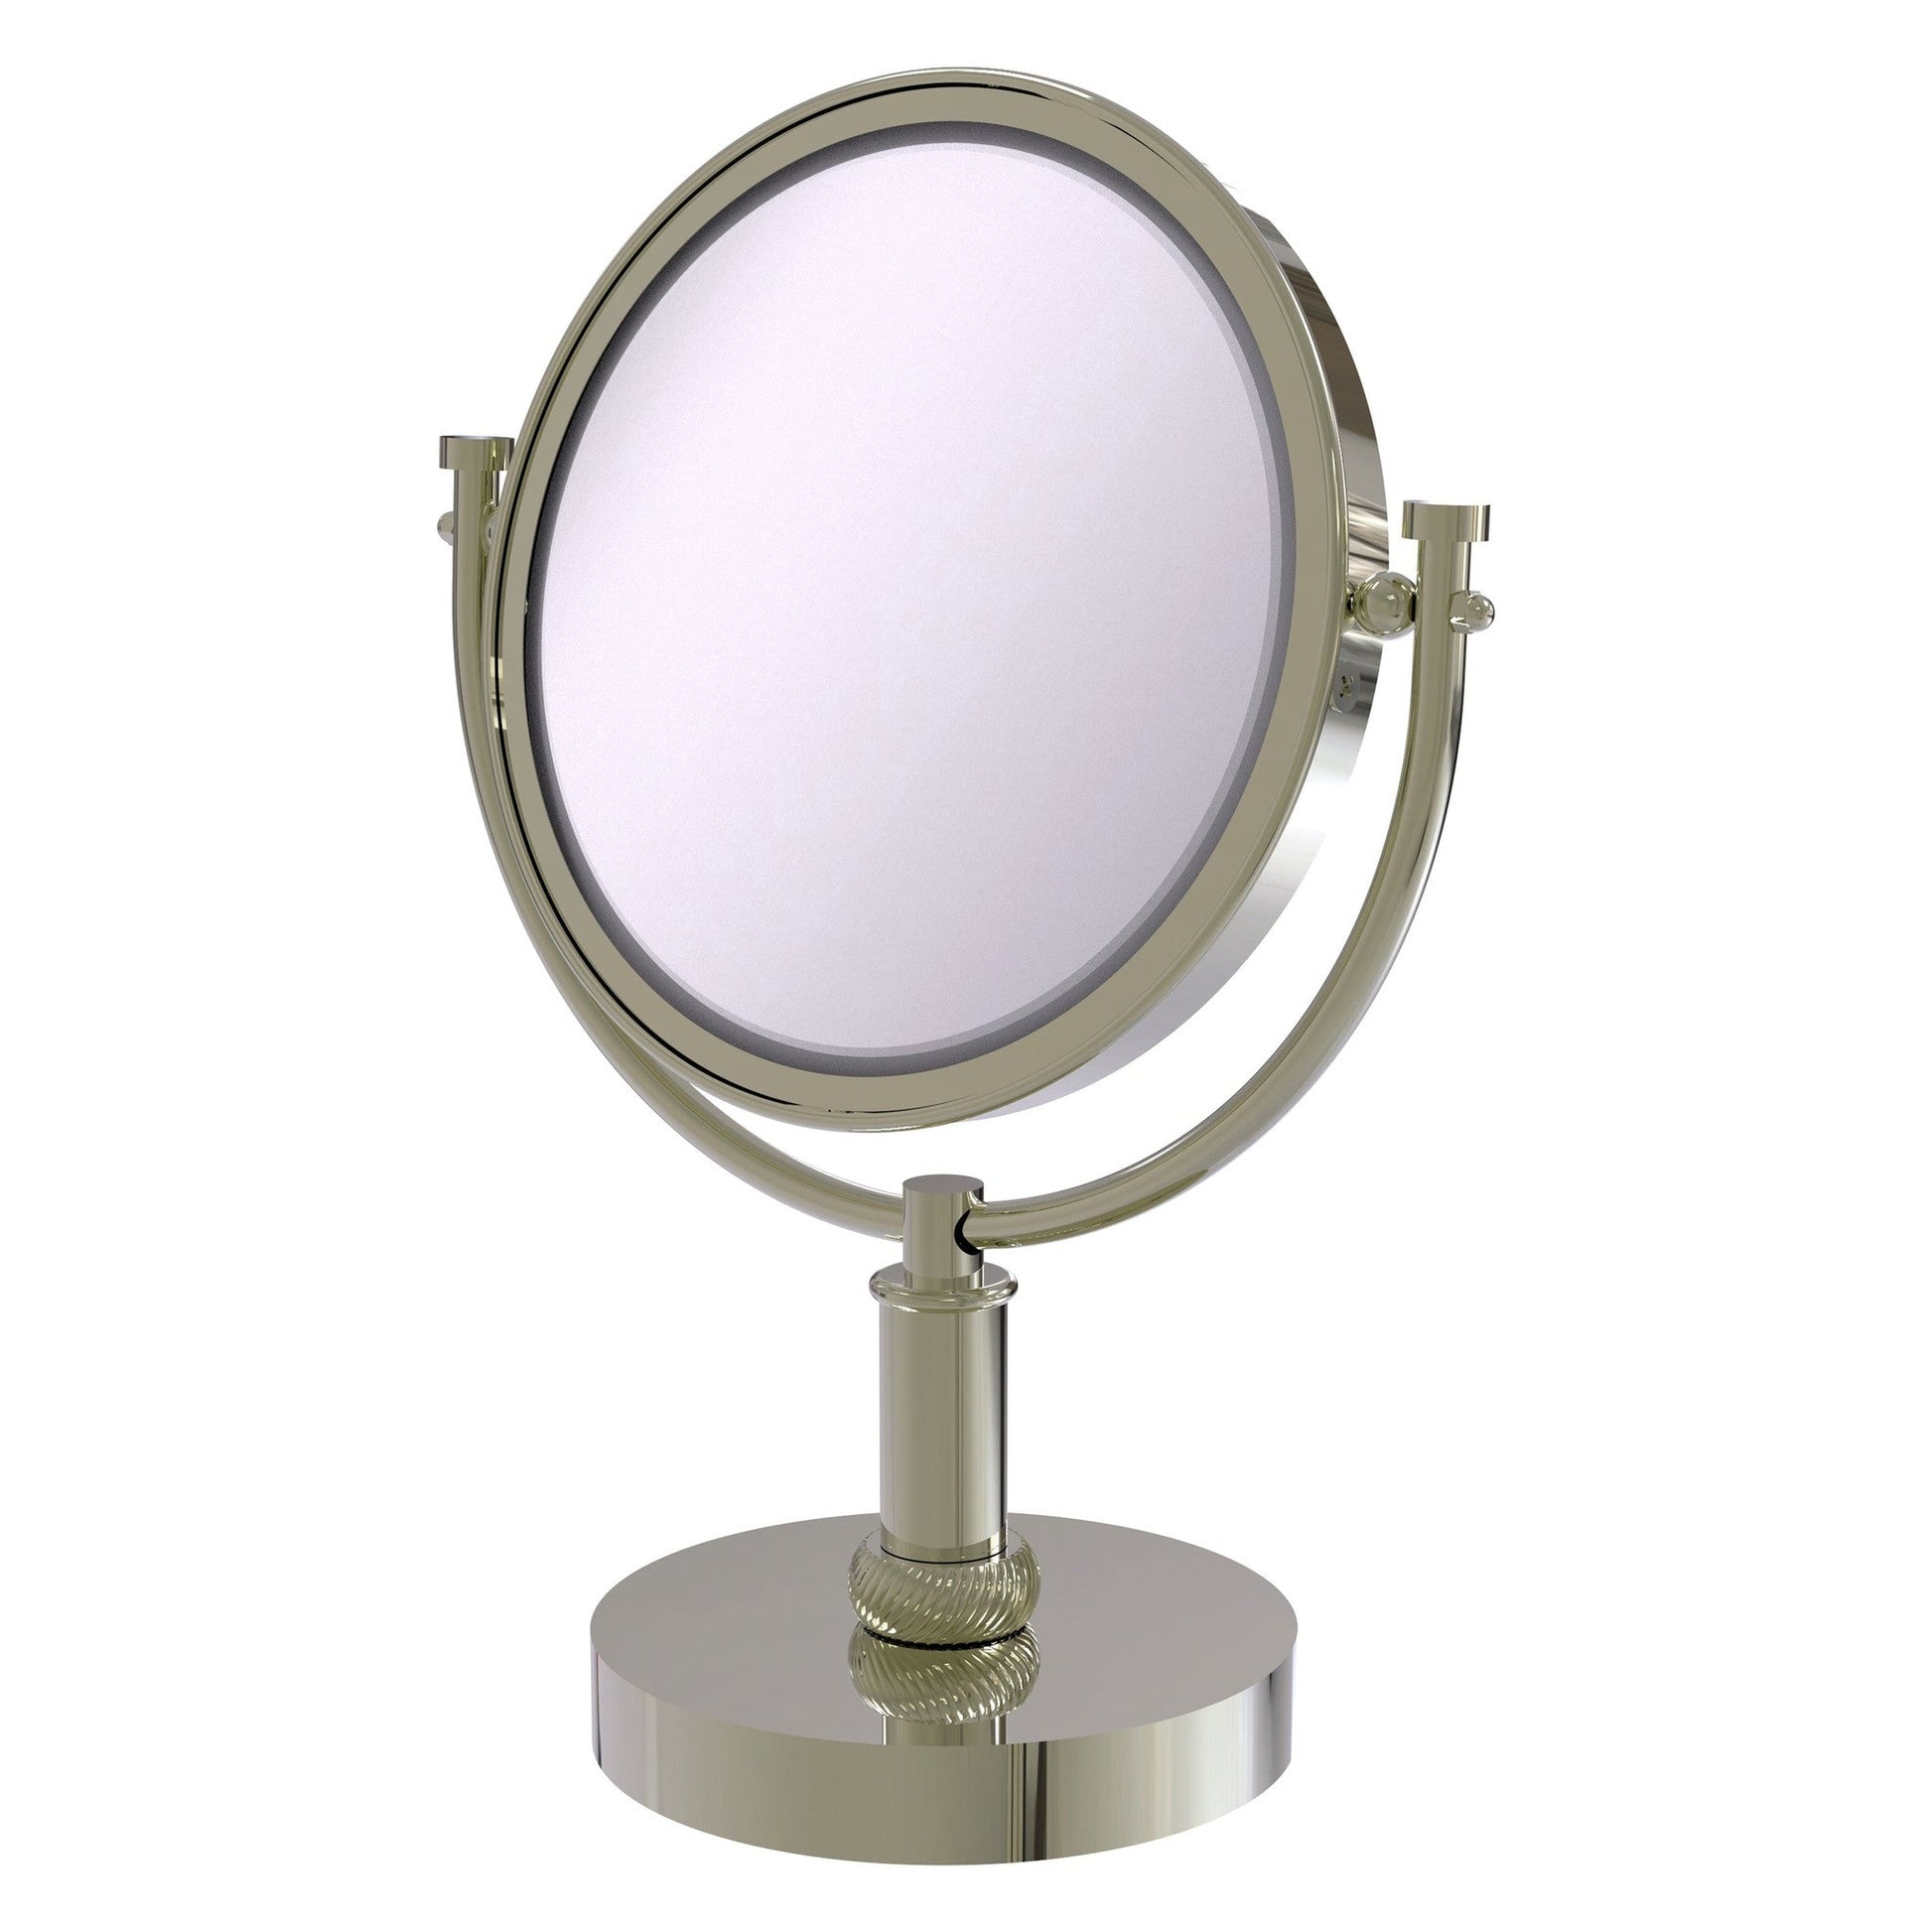 Allied Brass DM-4T/2X 8" x 8" Polished Nickel Solid Brass Vanity Top Make-Up Mirror 2X Magnification